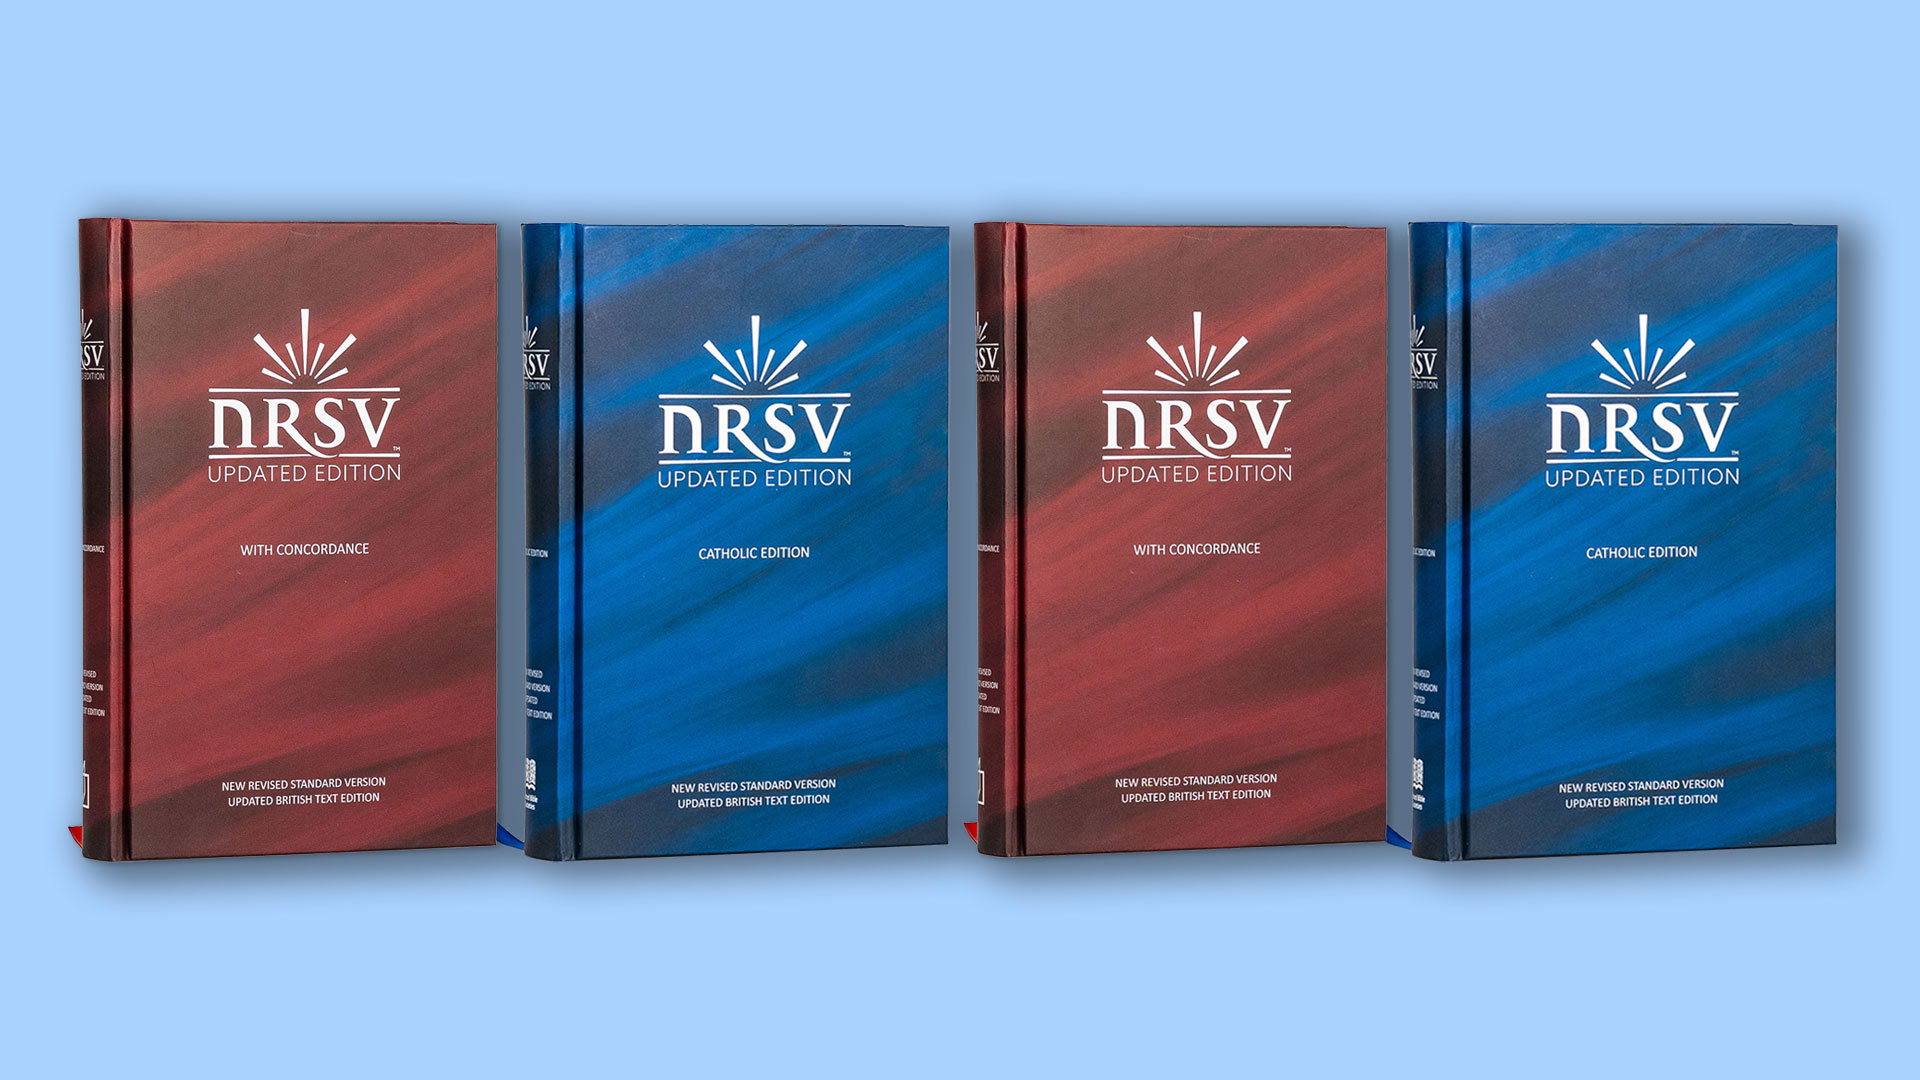 We are pleased to continue publishing the NRSV, featuring an updated British text